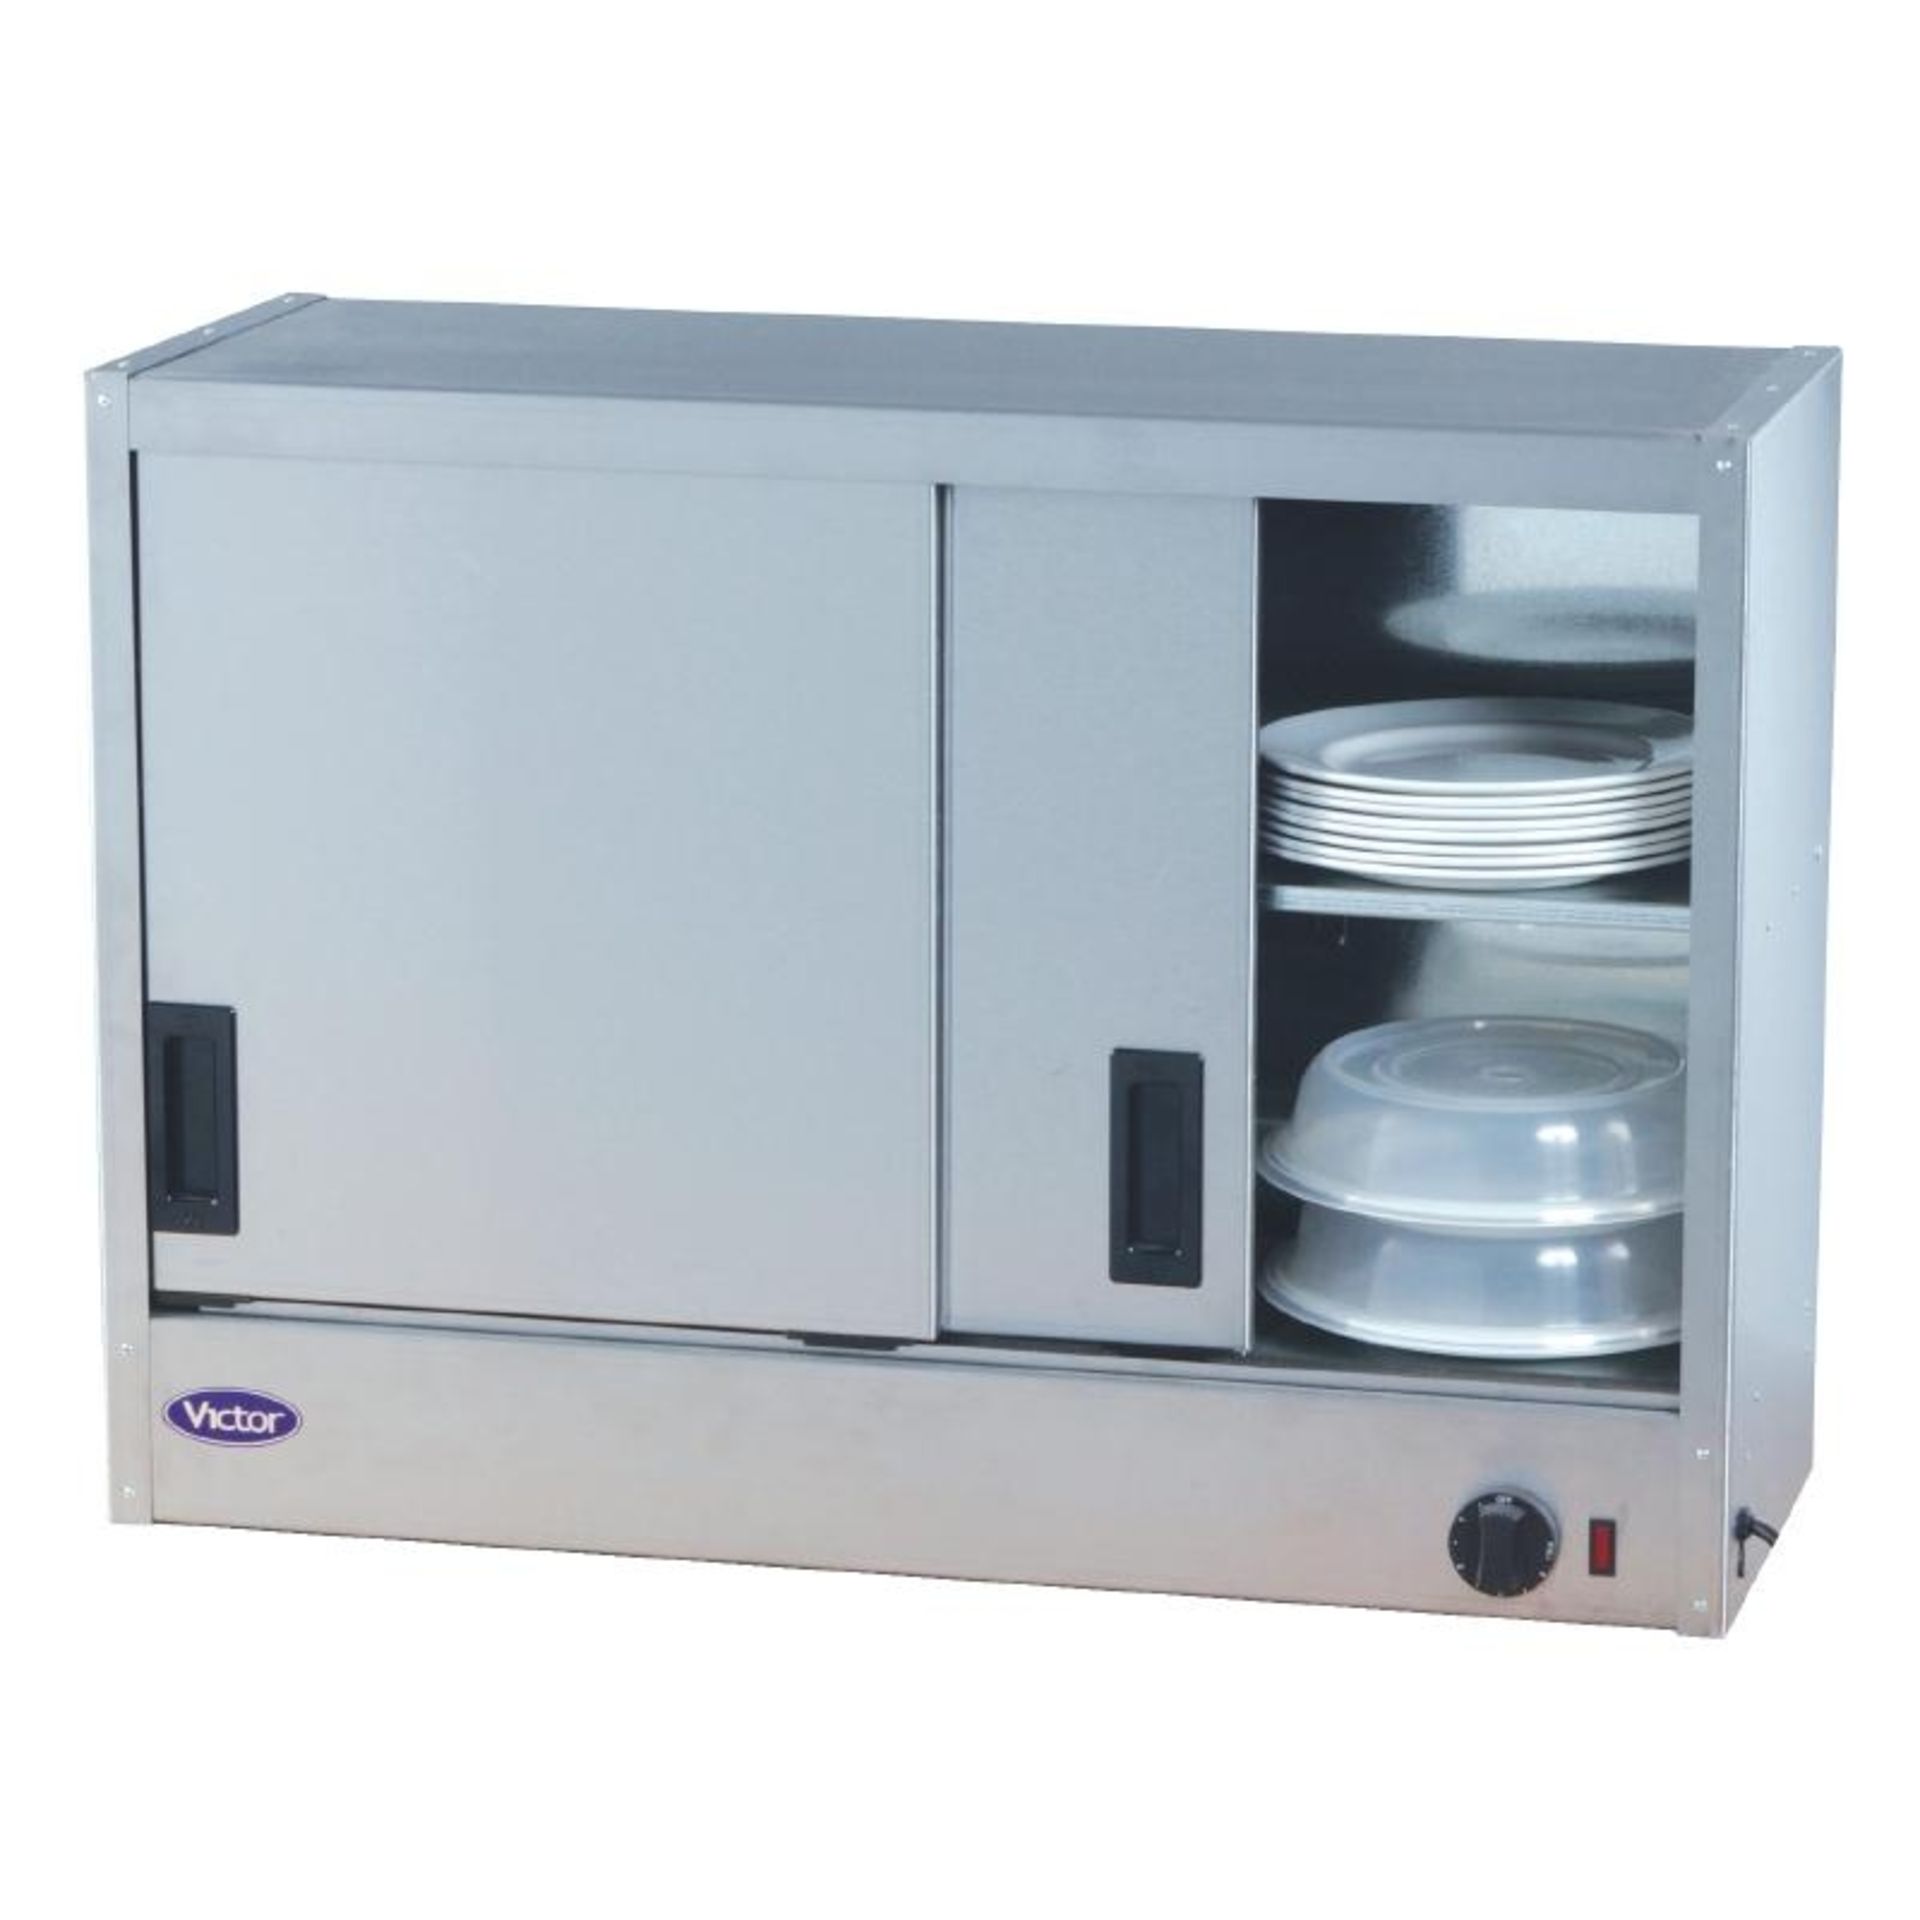 1 x Victor Earl Hot Cupboard - Model Number HED90100 - CL188 - Capacity 18 Plated Meals or 80 x